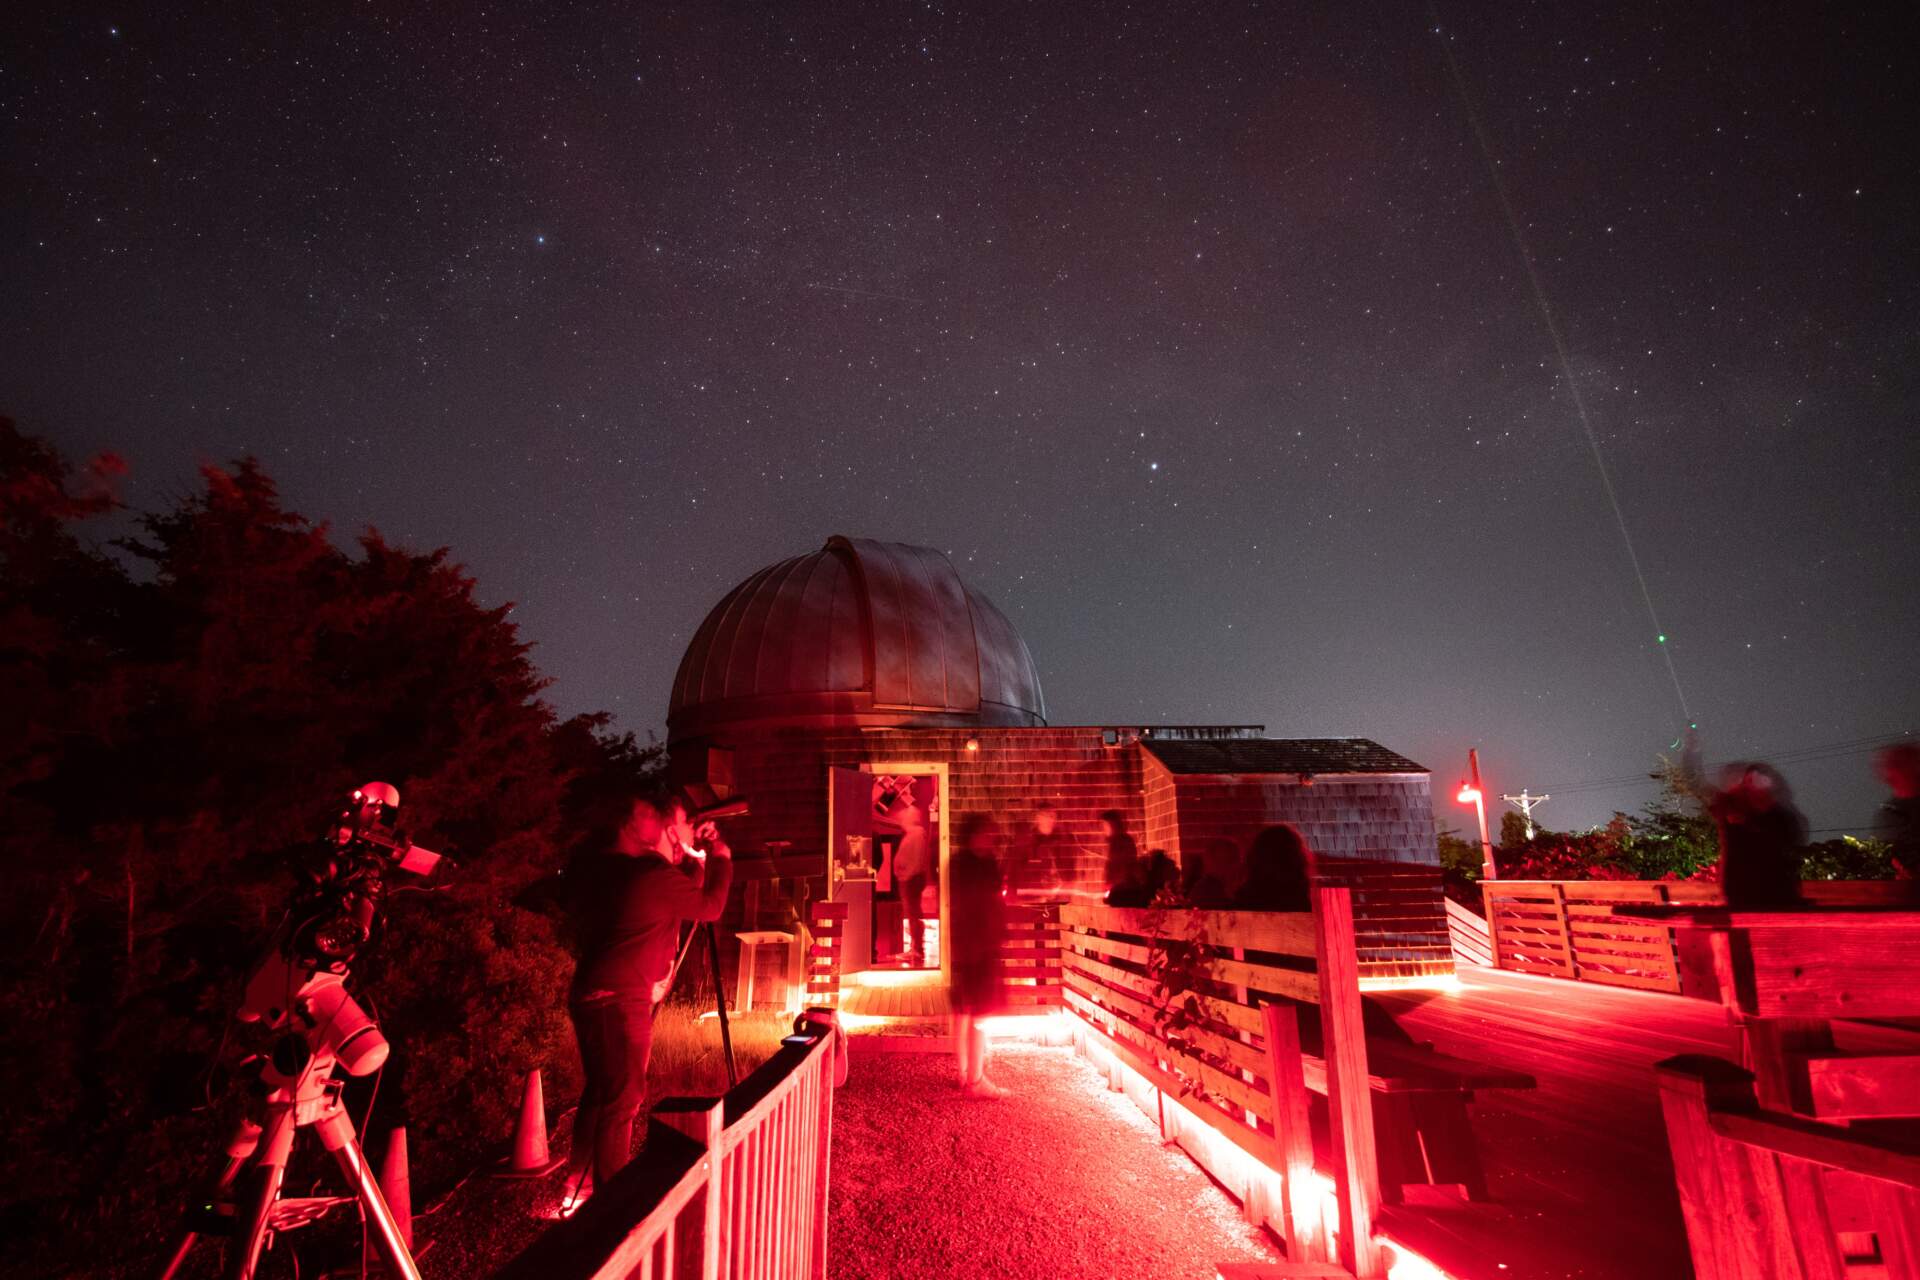 Stargazing event at the Loines Observatory in Nantucket. The island is home to two active observatories operated by the Maria Mitchell Association (Photo courtesy of Anavi Uppal)